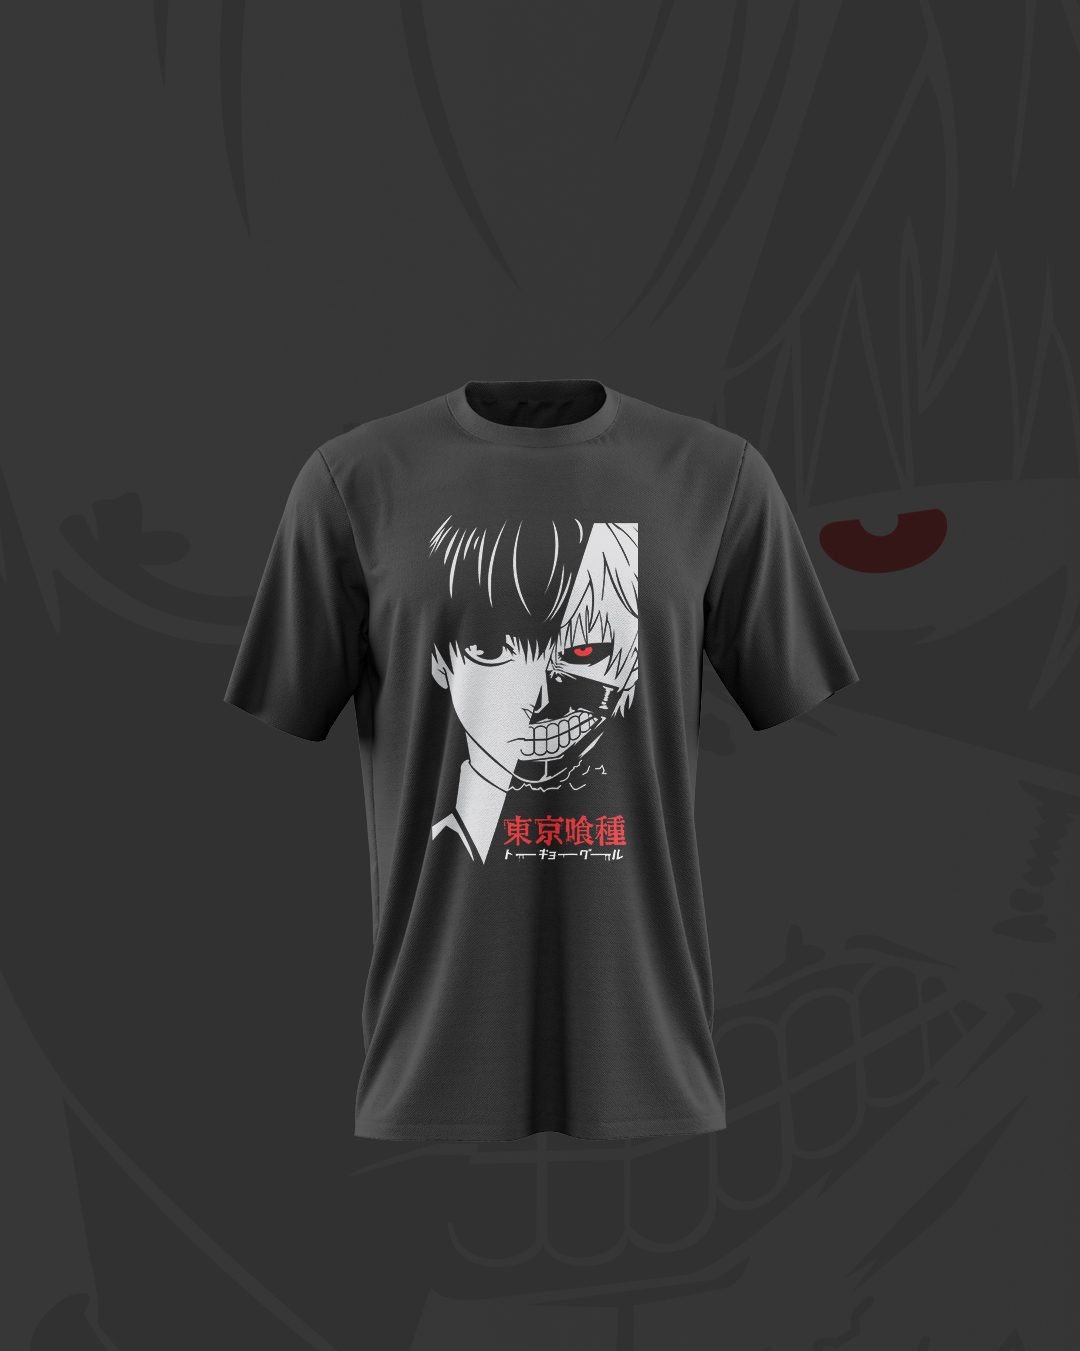 TeesWarrior Anime Character Graphic Printed 100% Cotton T-Shirt – Regular Fit, Round Neck, Half Sleeves